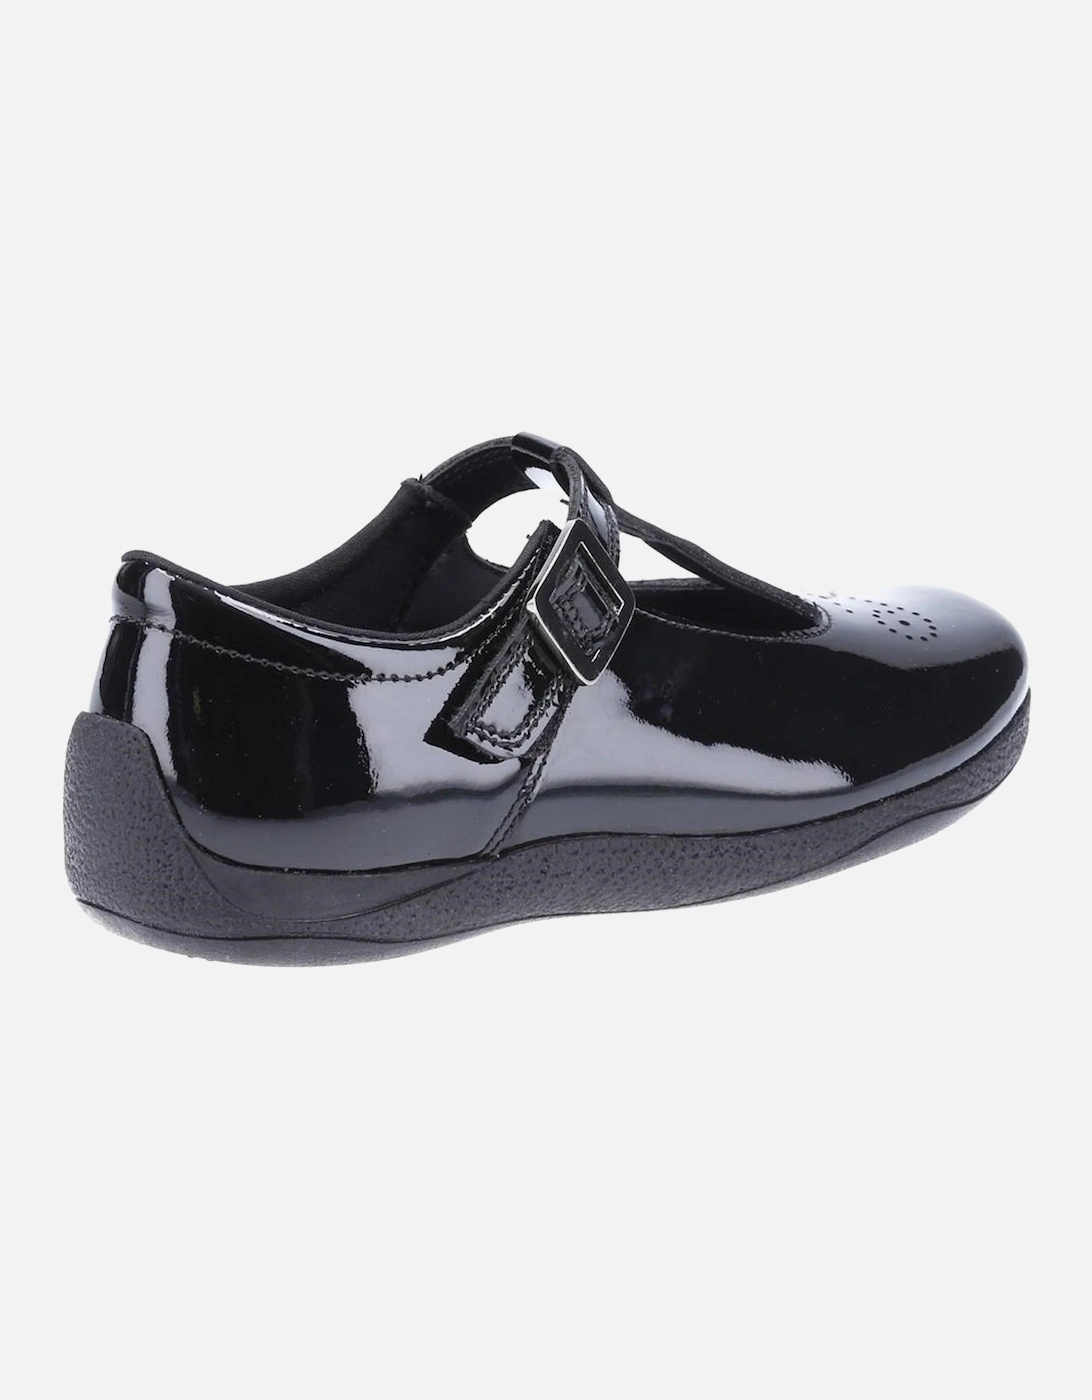 Girls Eliza Patent Leather School Shoes